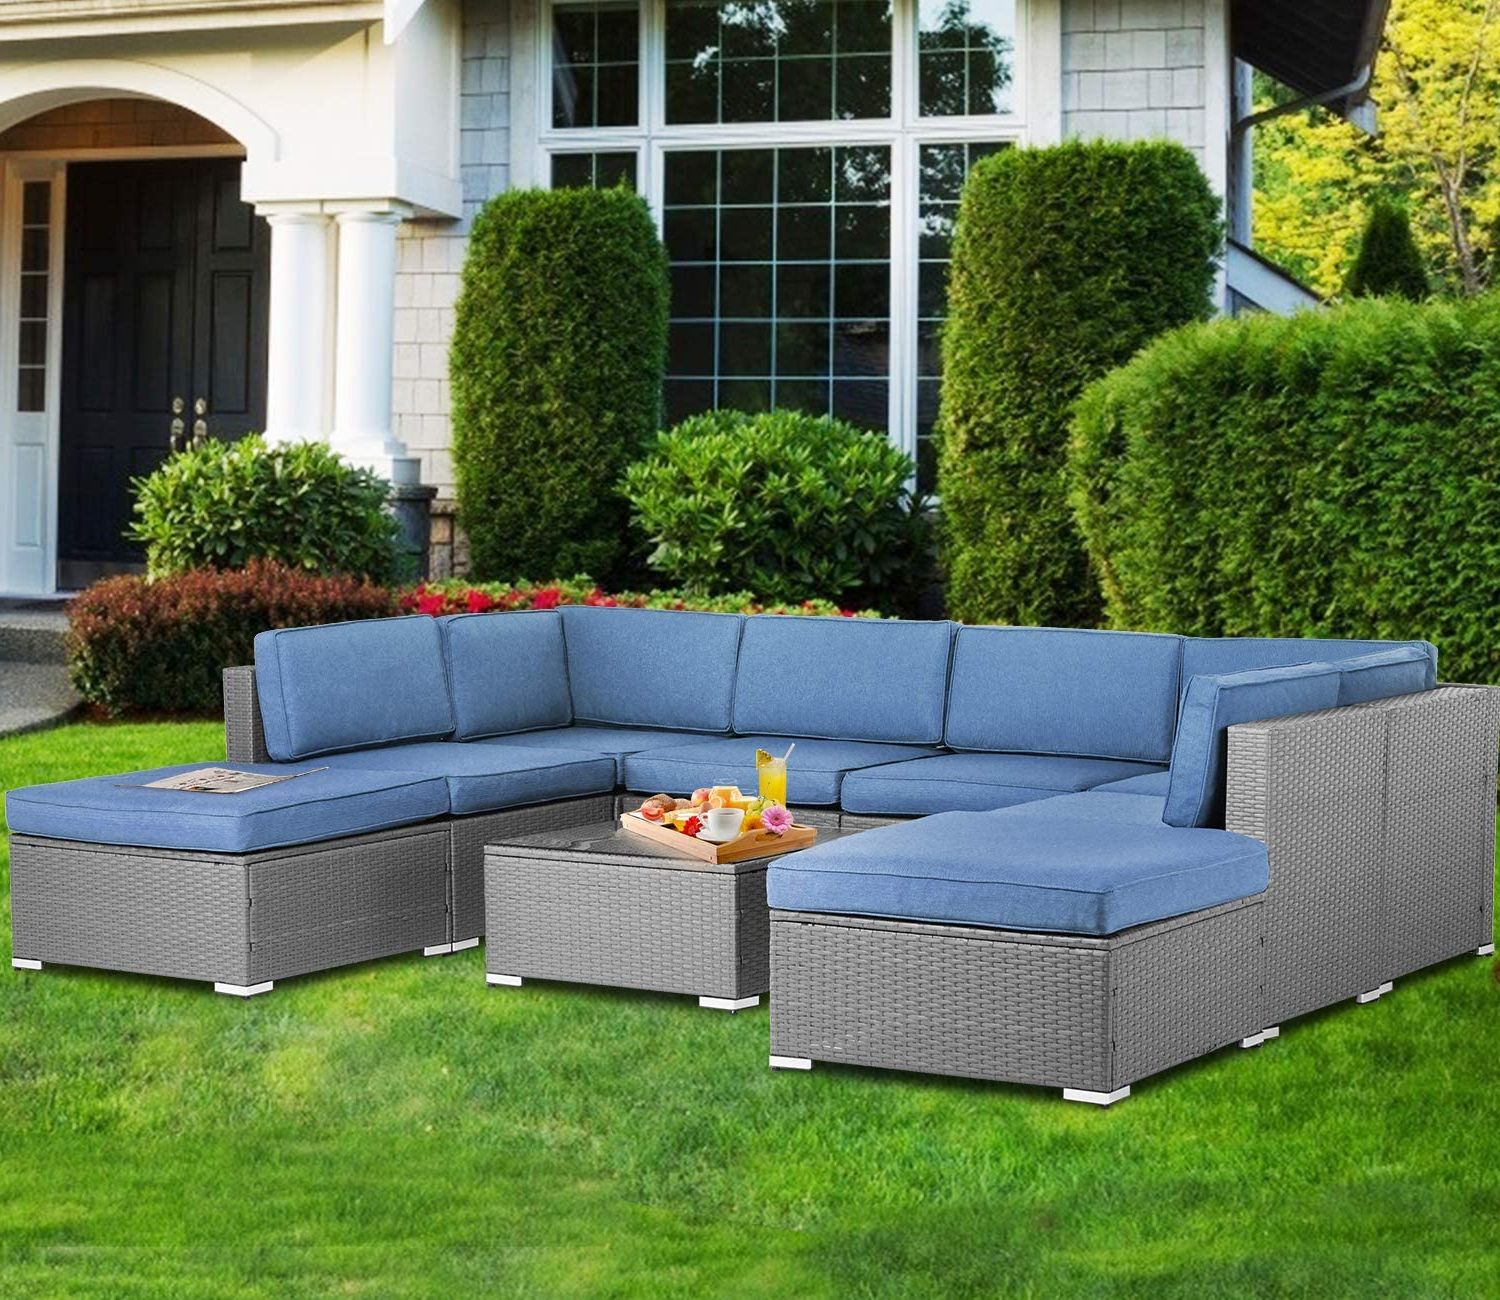 Suncrown Outdoor Furniture 9 Piece Patio Sofa Modular Sectional Gray Intended For Most Popular Outdoor Seating Sectional Patio Sets (View 1 of 15)